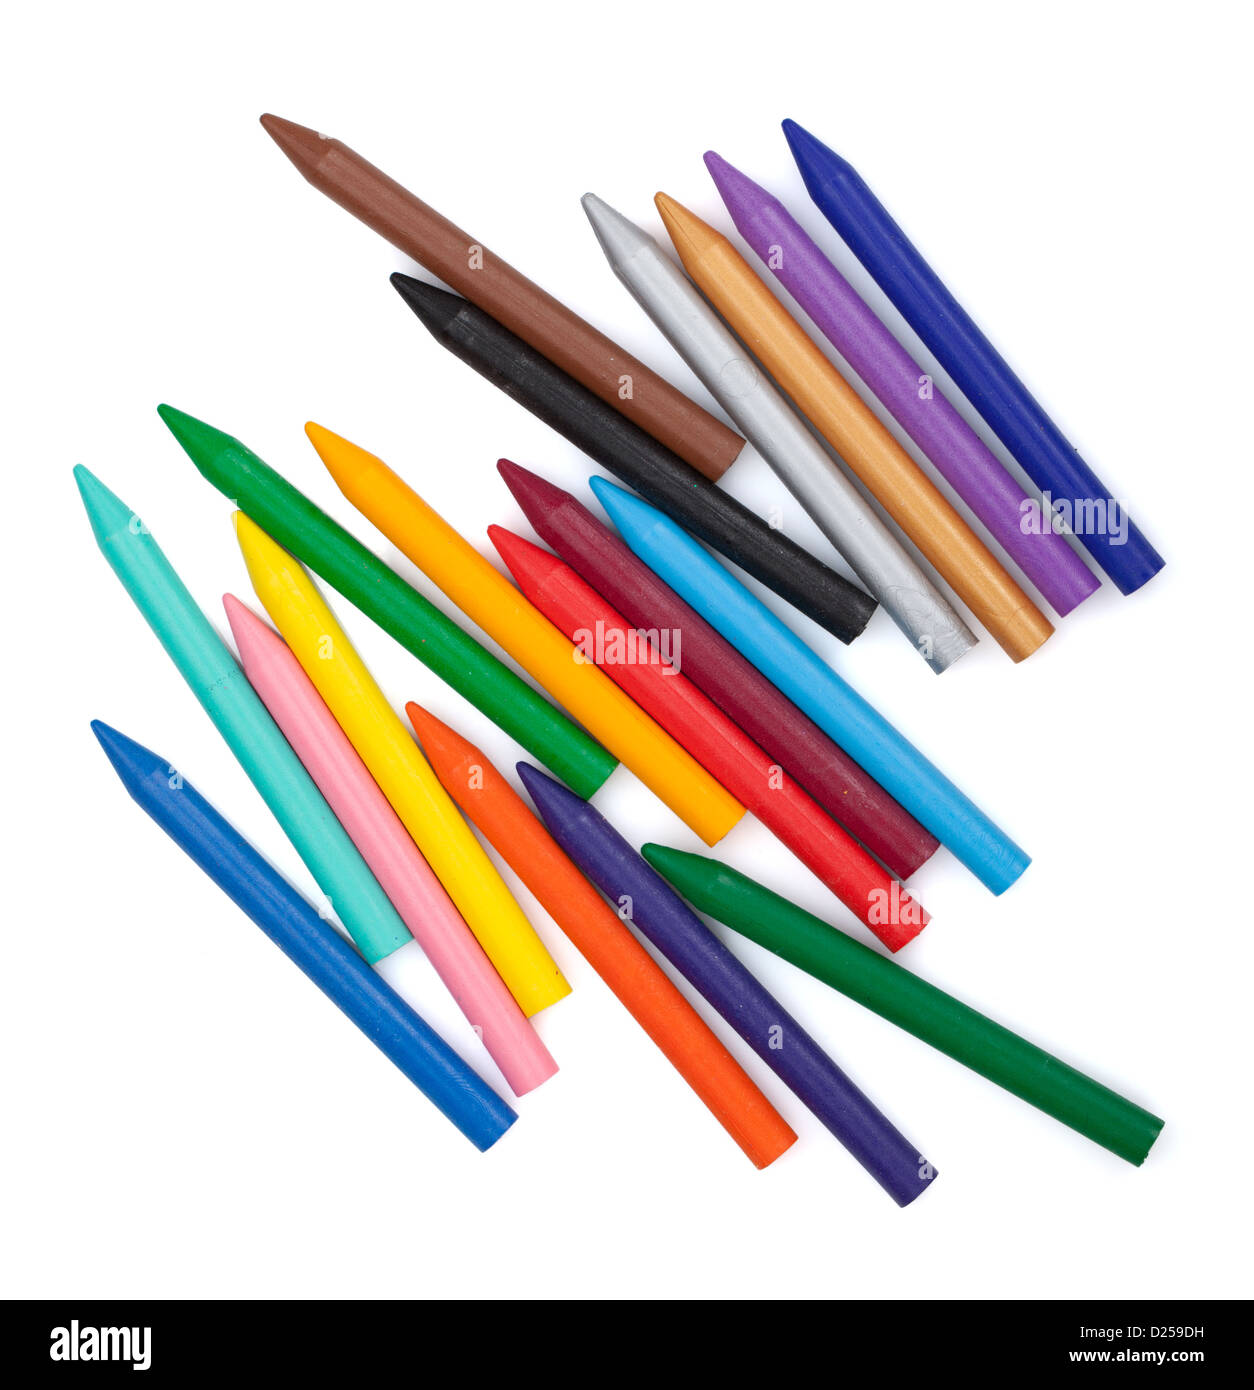 https://c8.alamy.com/comp/D259DH/various-color-markers-isolated-on-white-background-D259DH.jpg